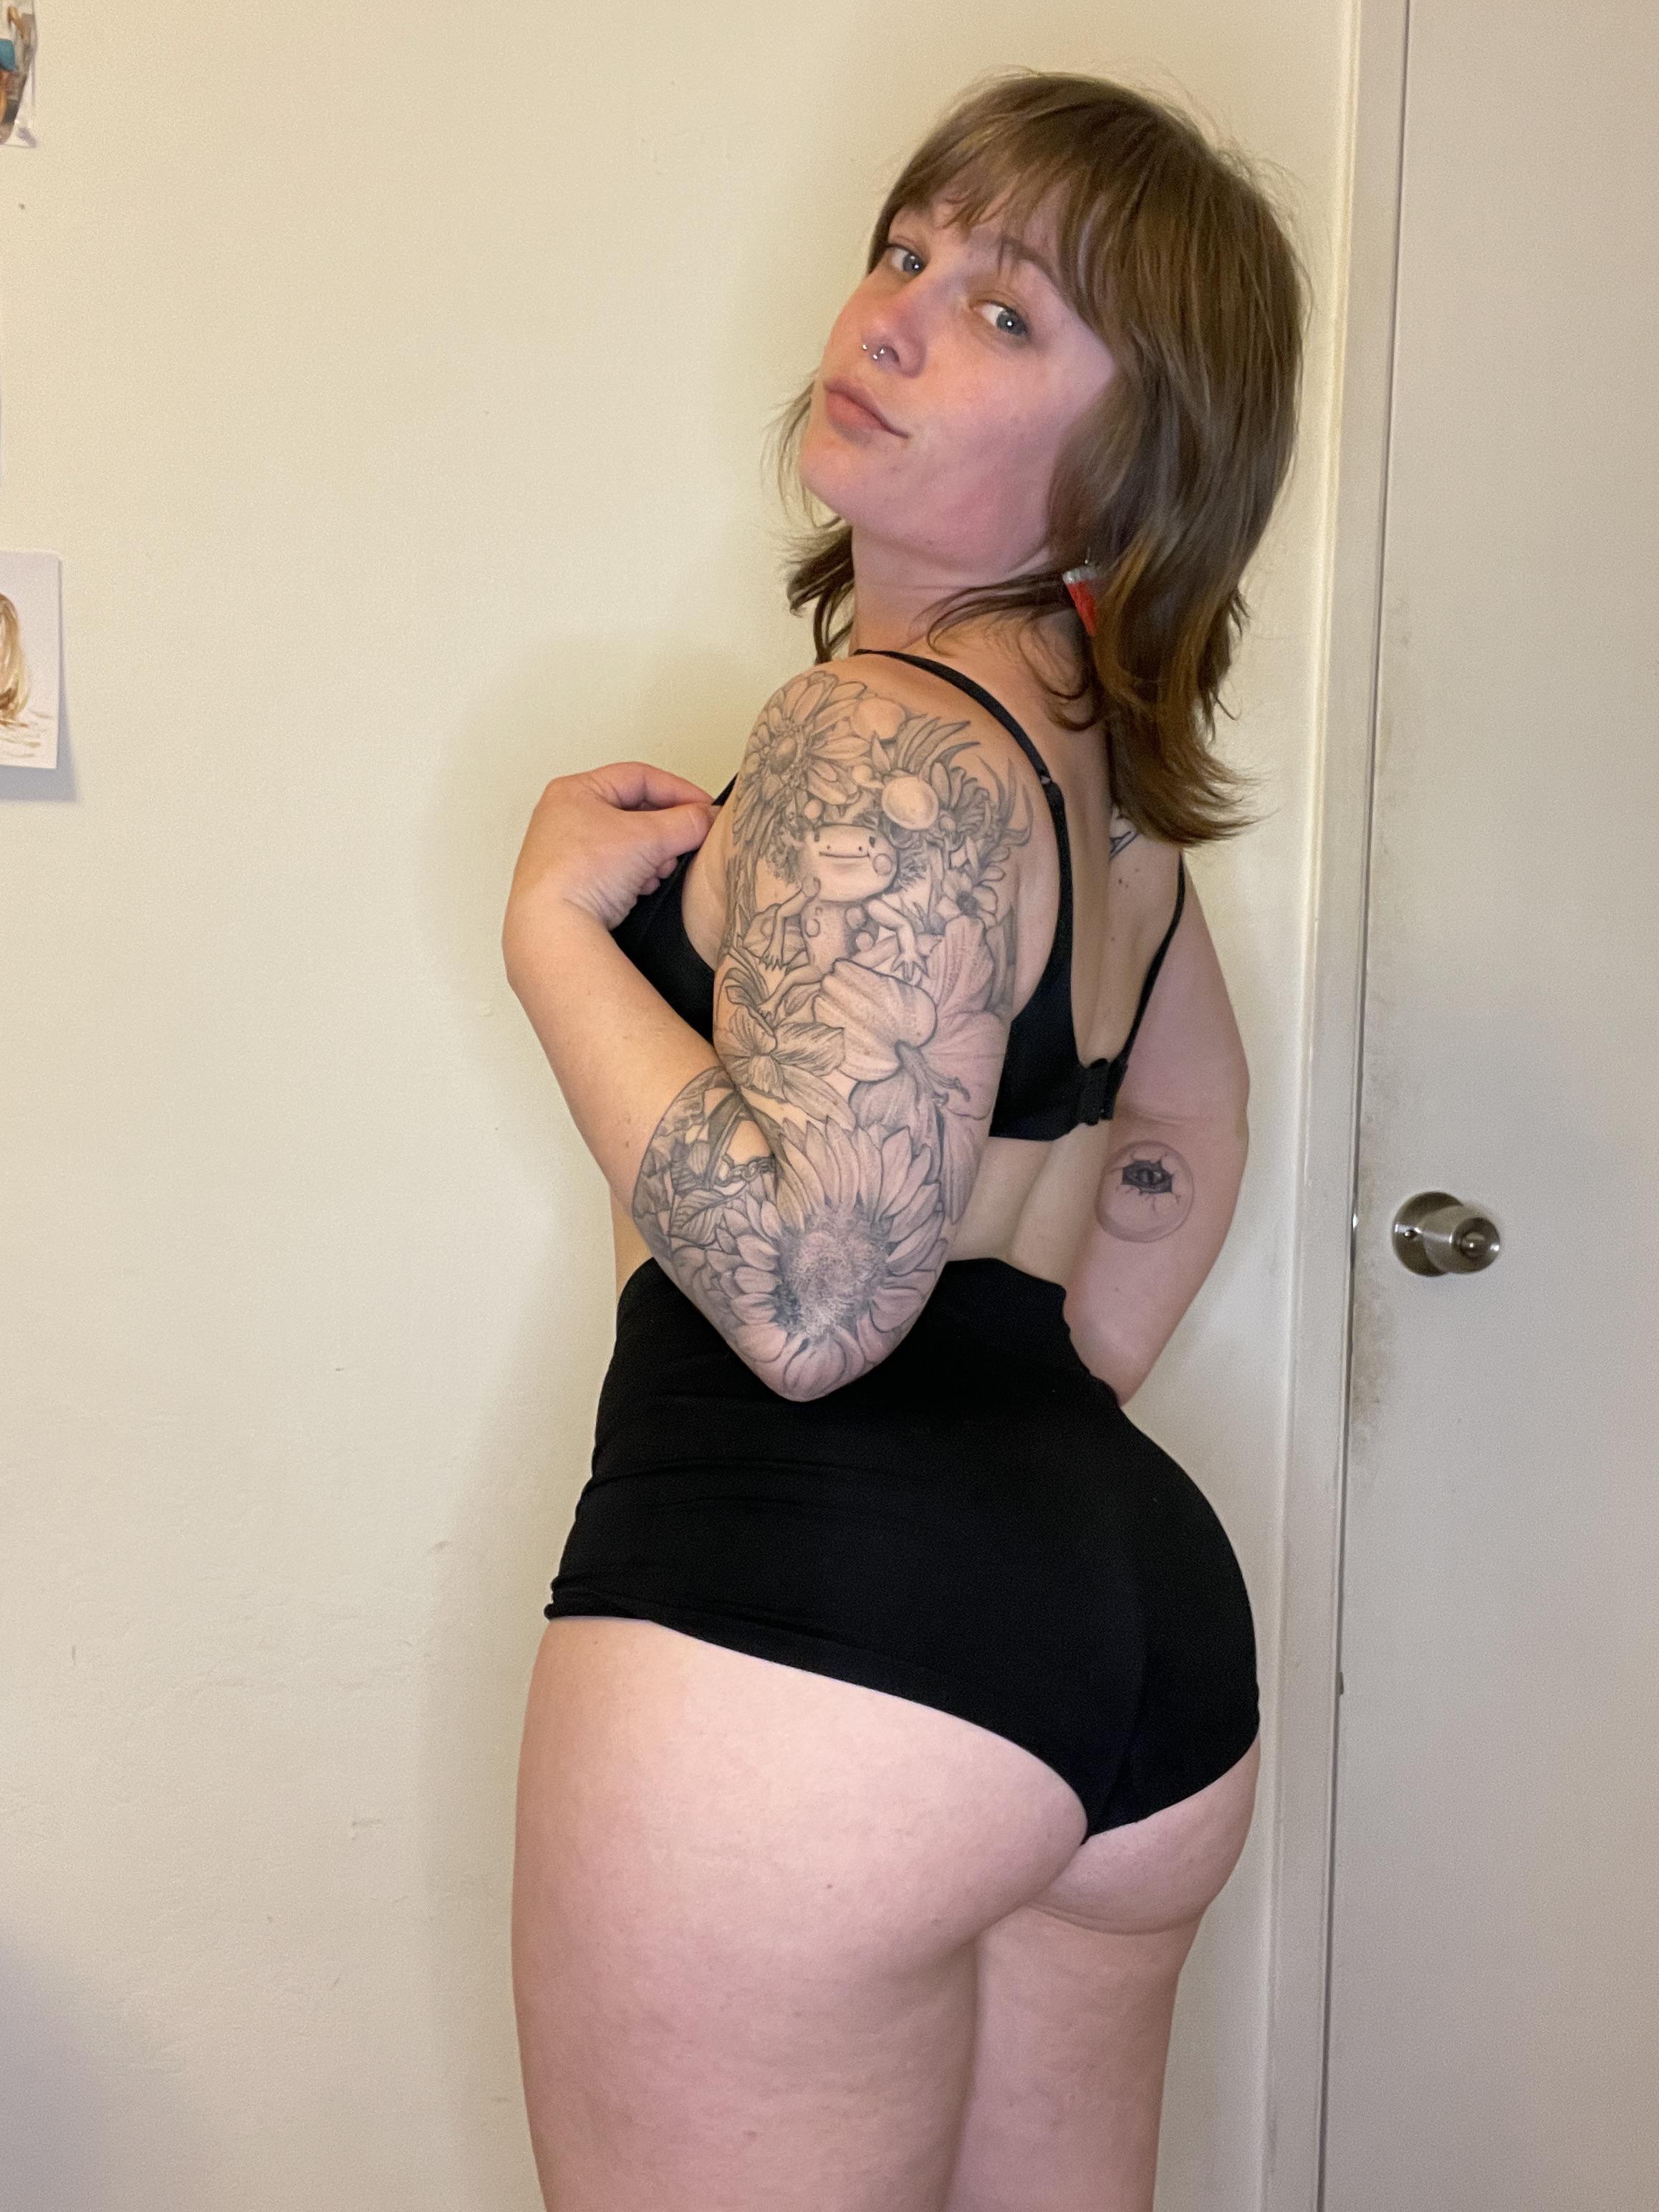 PAWG Tbh Im in need of a good spanking